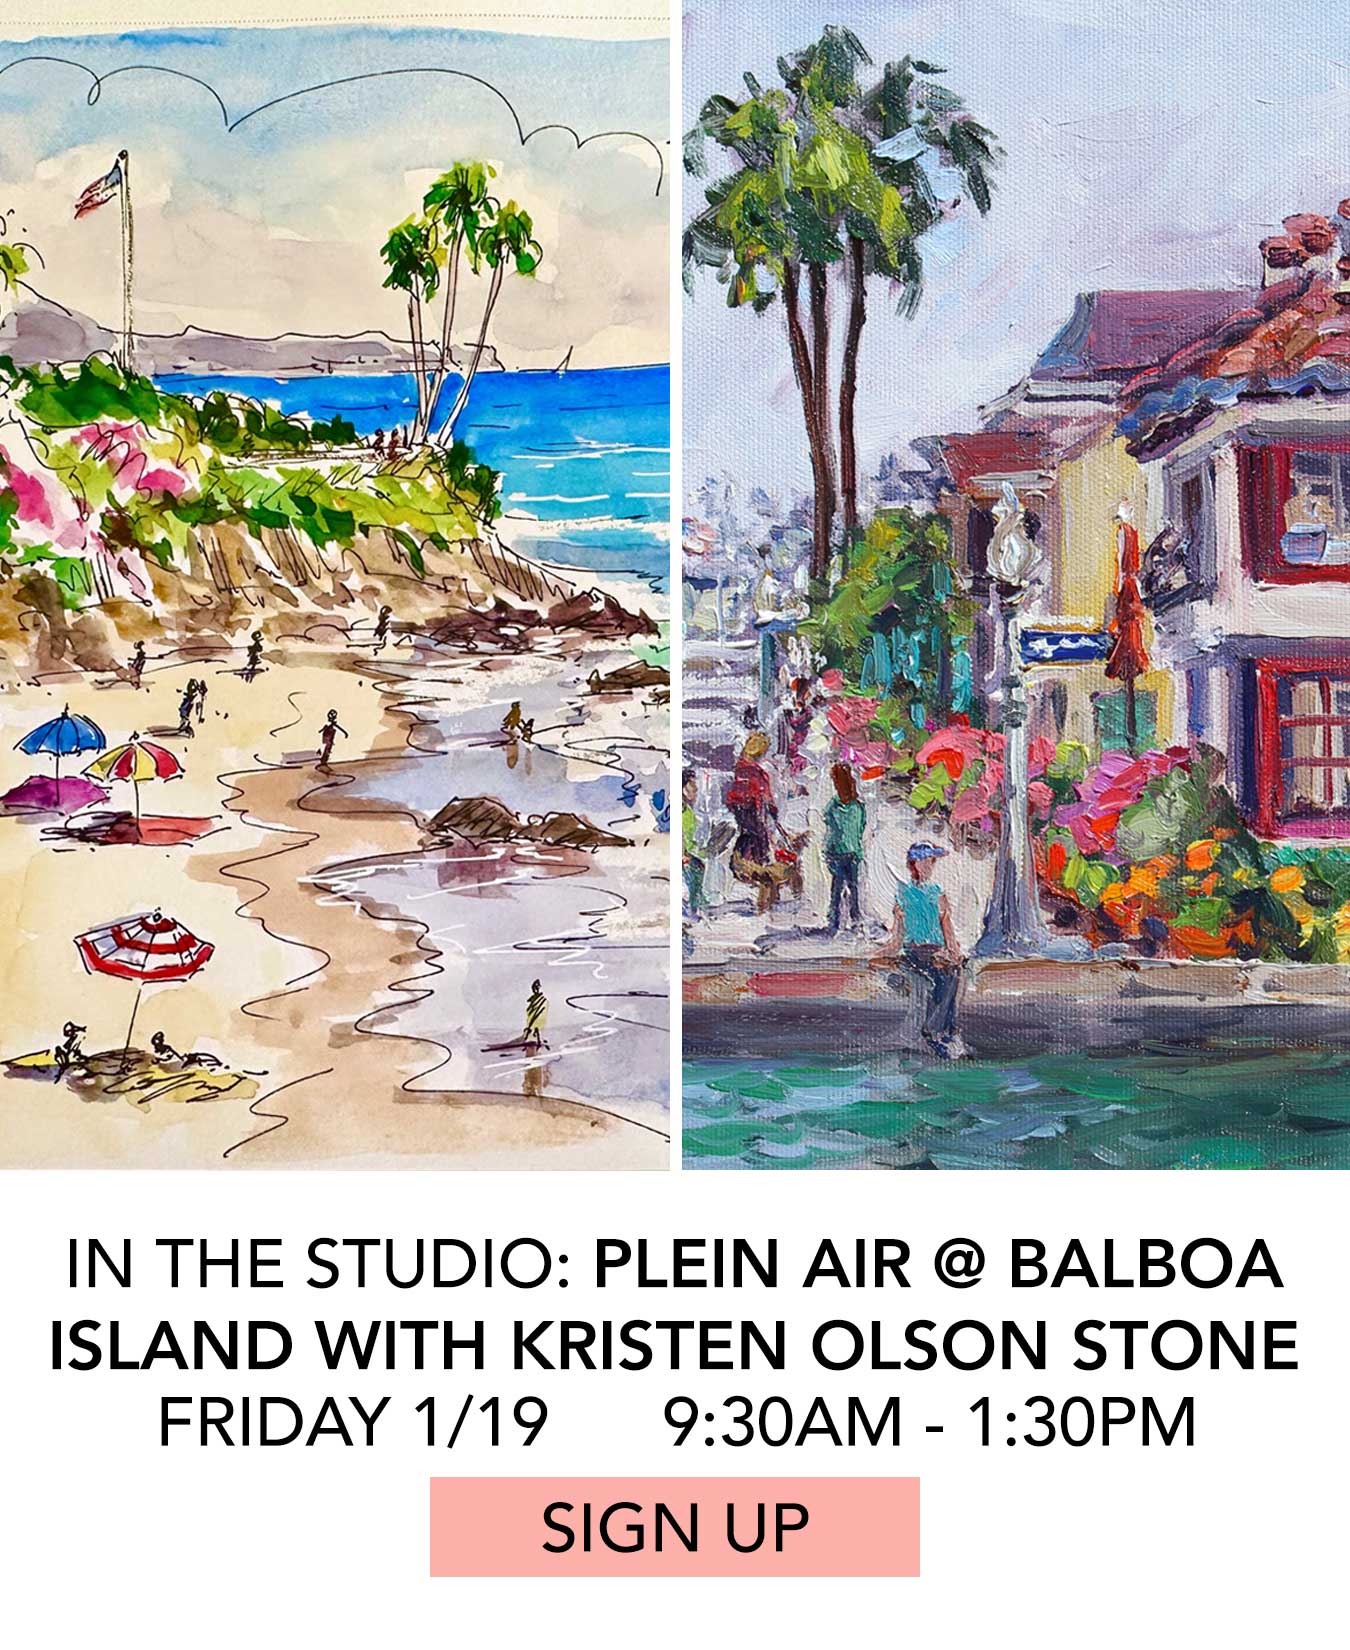 In the Studio: Plein Air at Balboa Island with Kristen Olson Stone. Friday 1/19 from 9:30am to 1:30pm. Click to Sign Up.